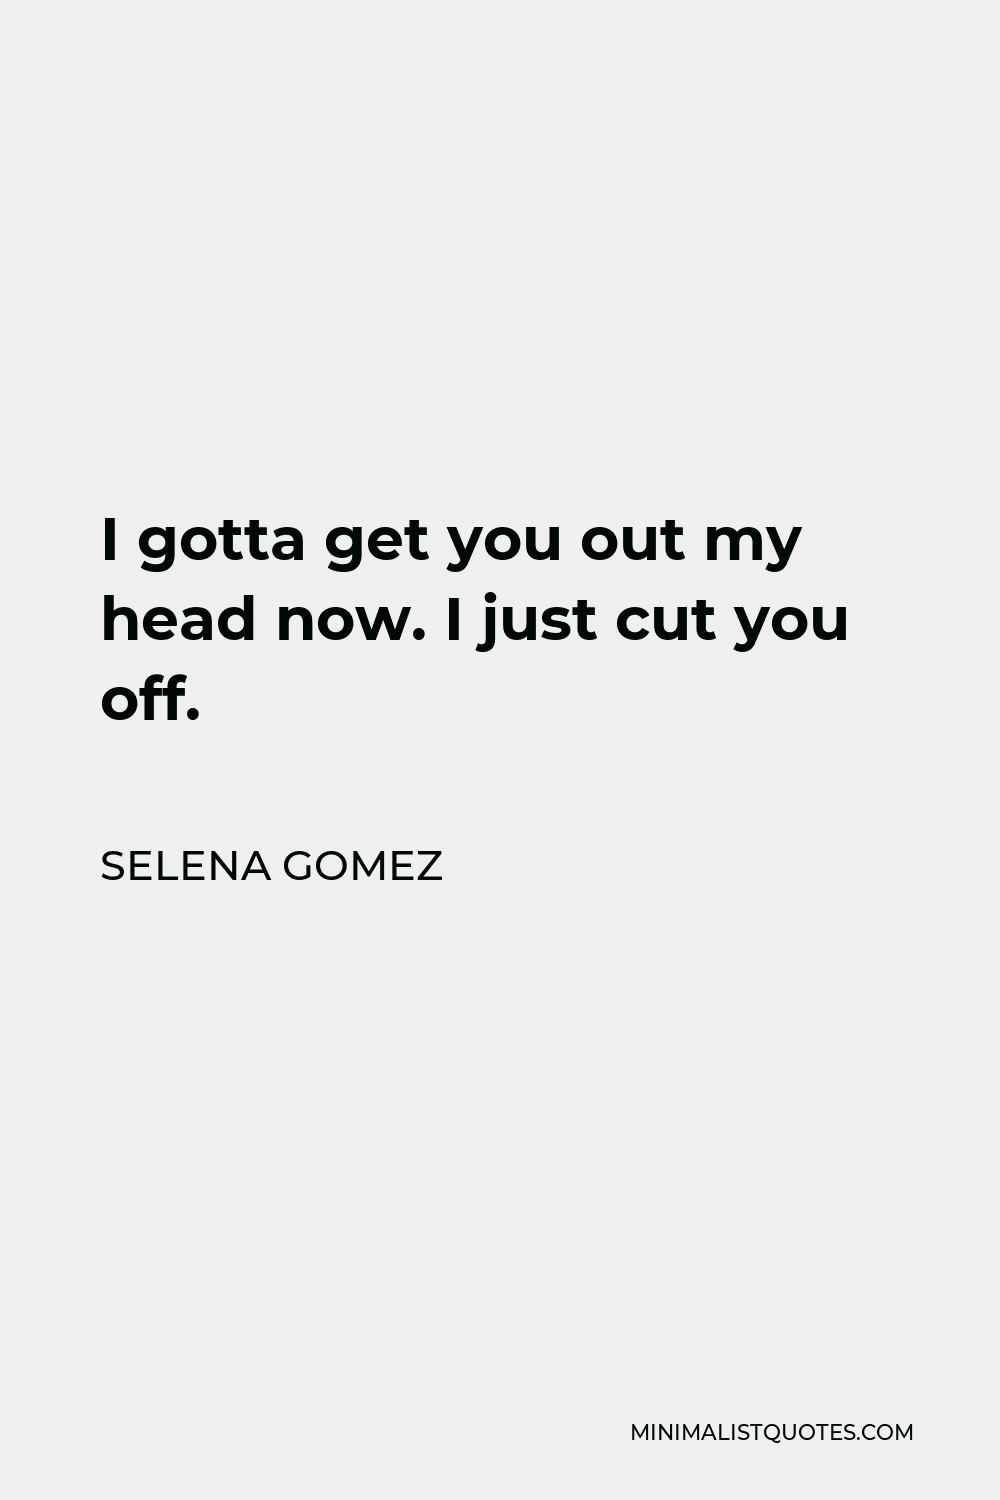 Selena Gomez Quote - I gotta get you out my head now. I just cut you off.